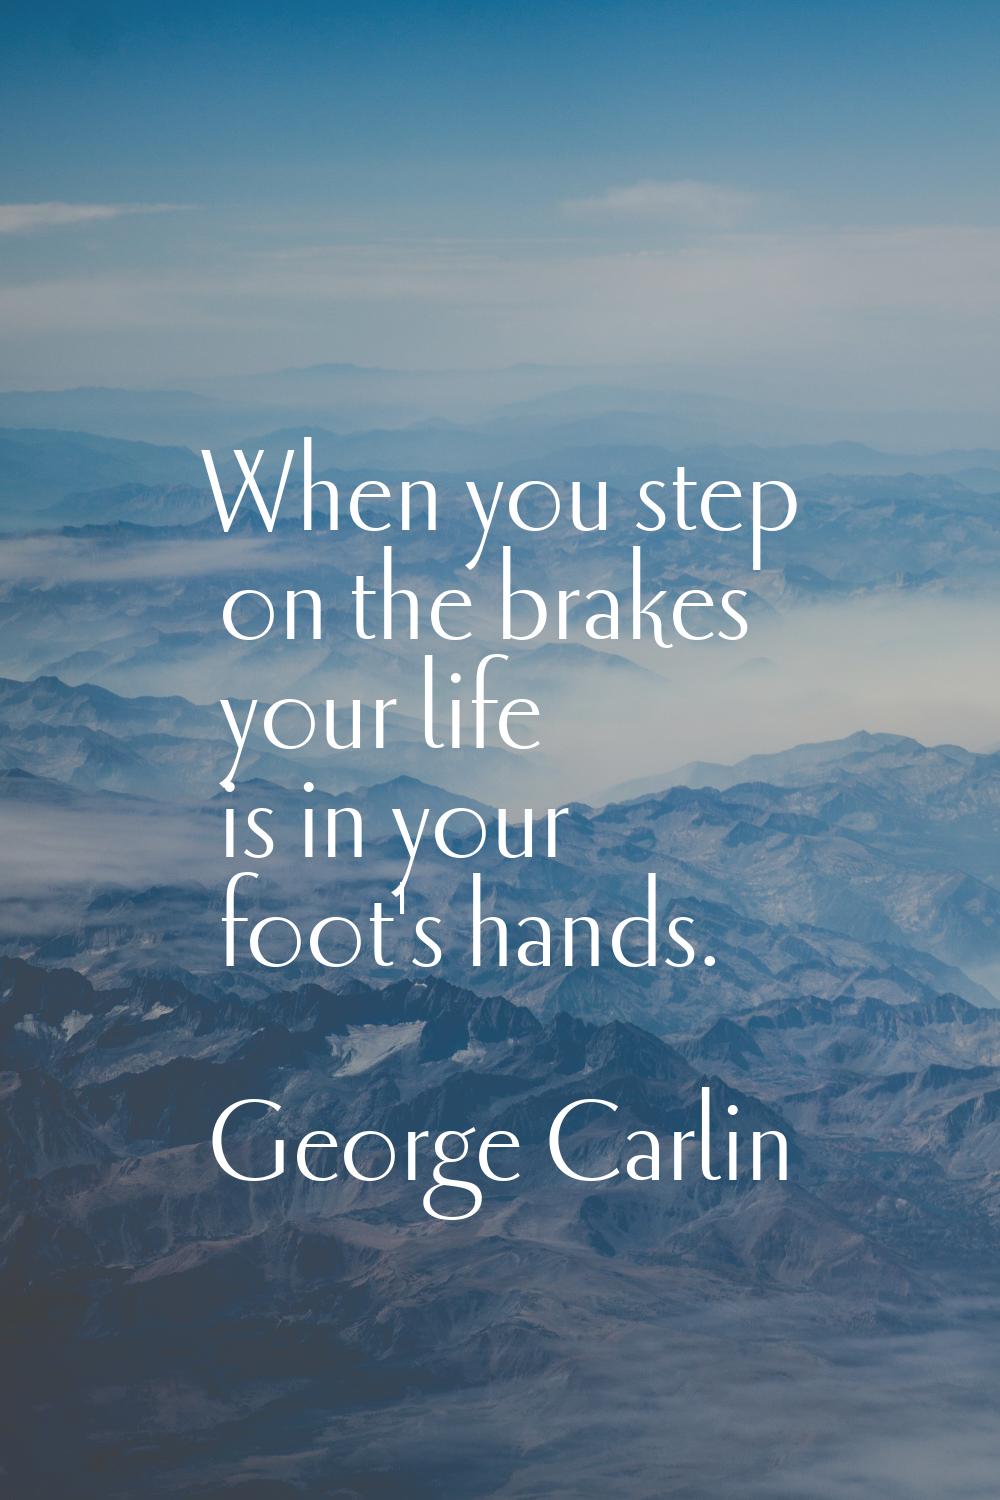 When you step on the brakes your life is in your foot's hands.